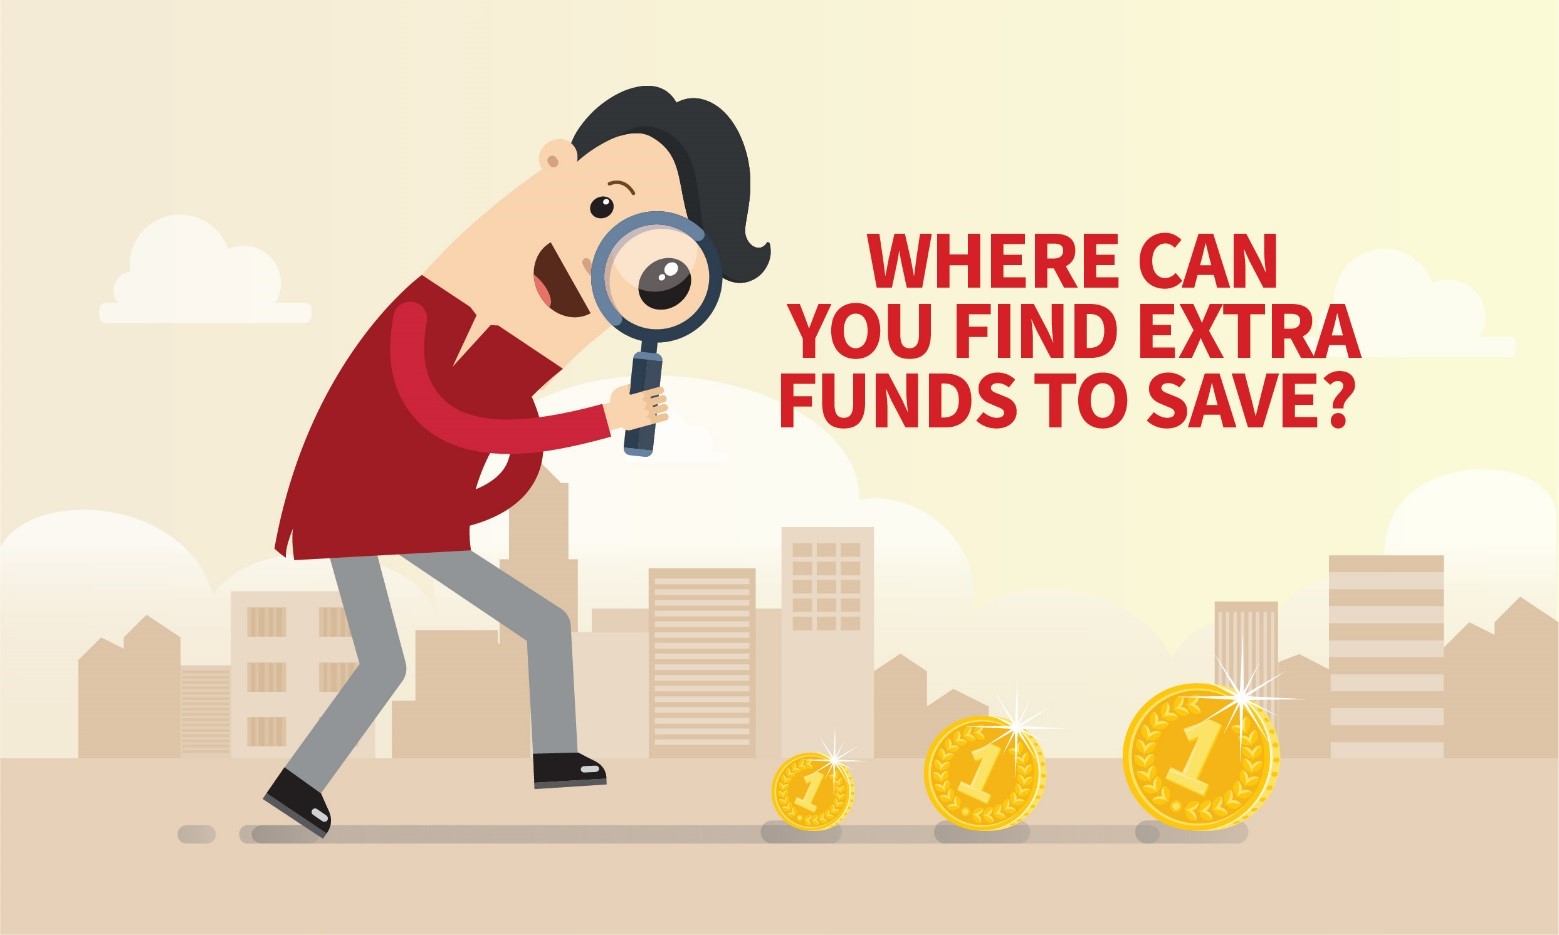 Where can you find extra funds to save